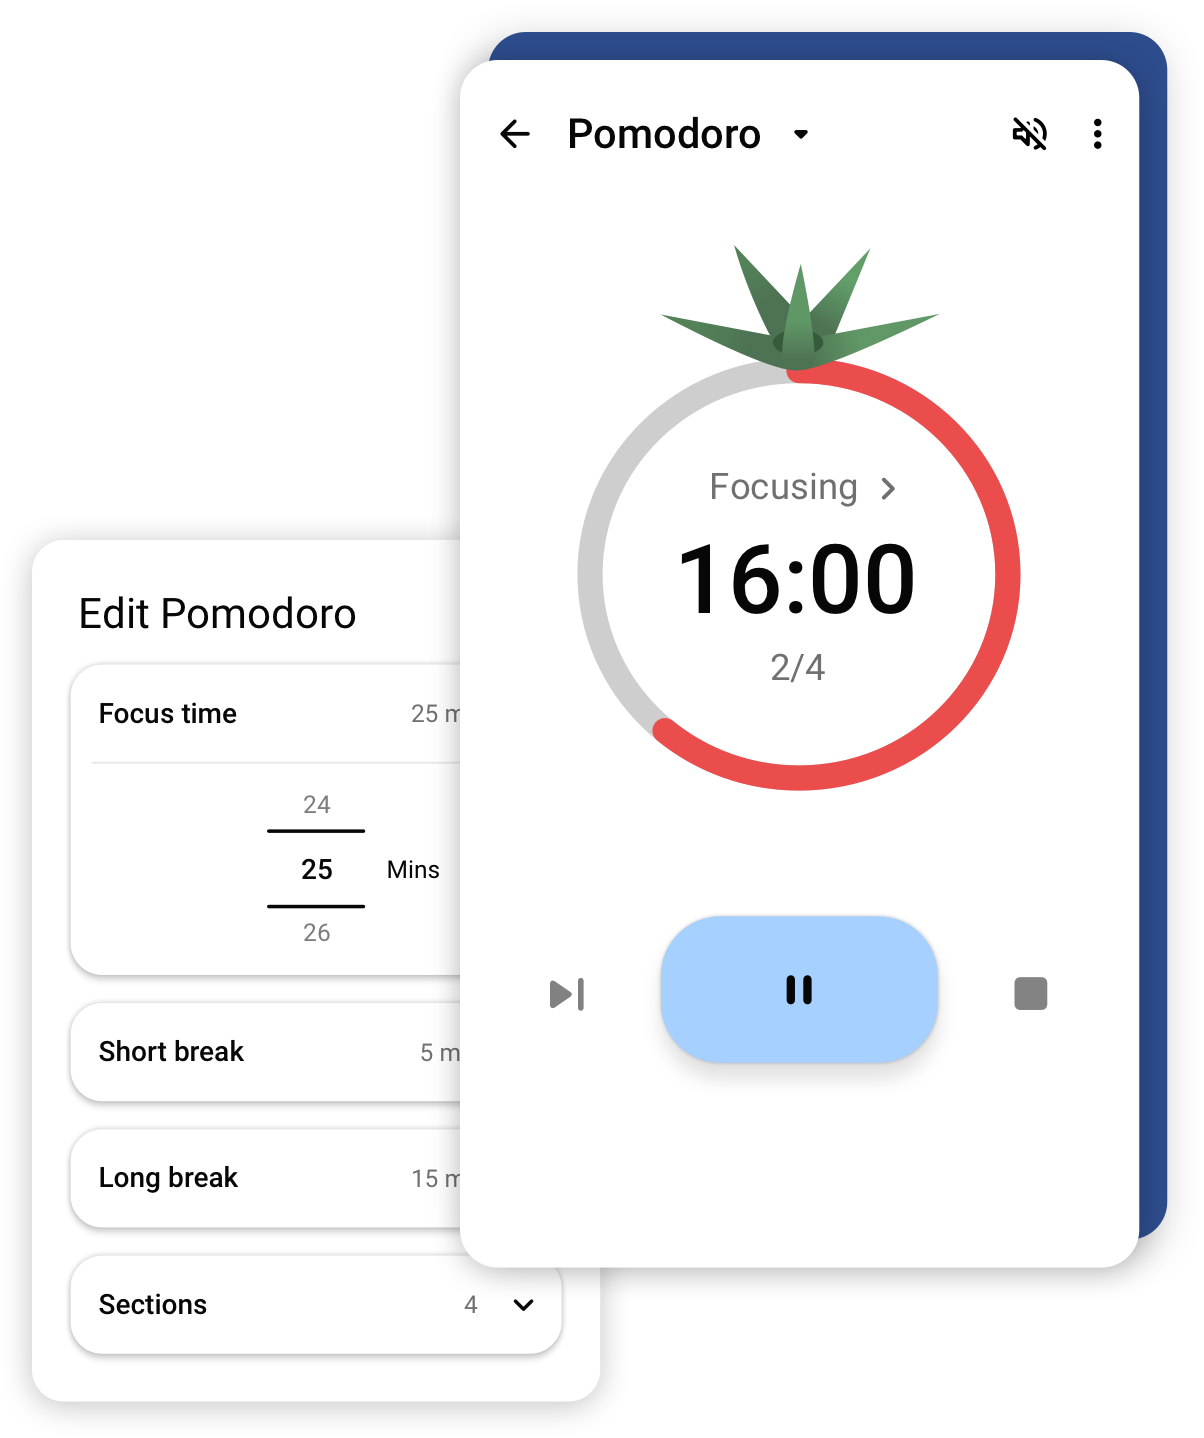 mobile app to improve focus and get more productive using Pomodoro technique